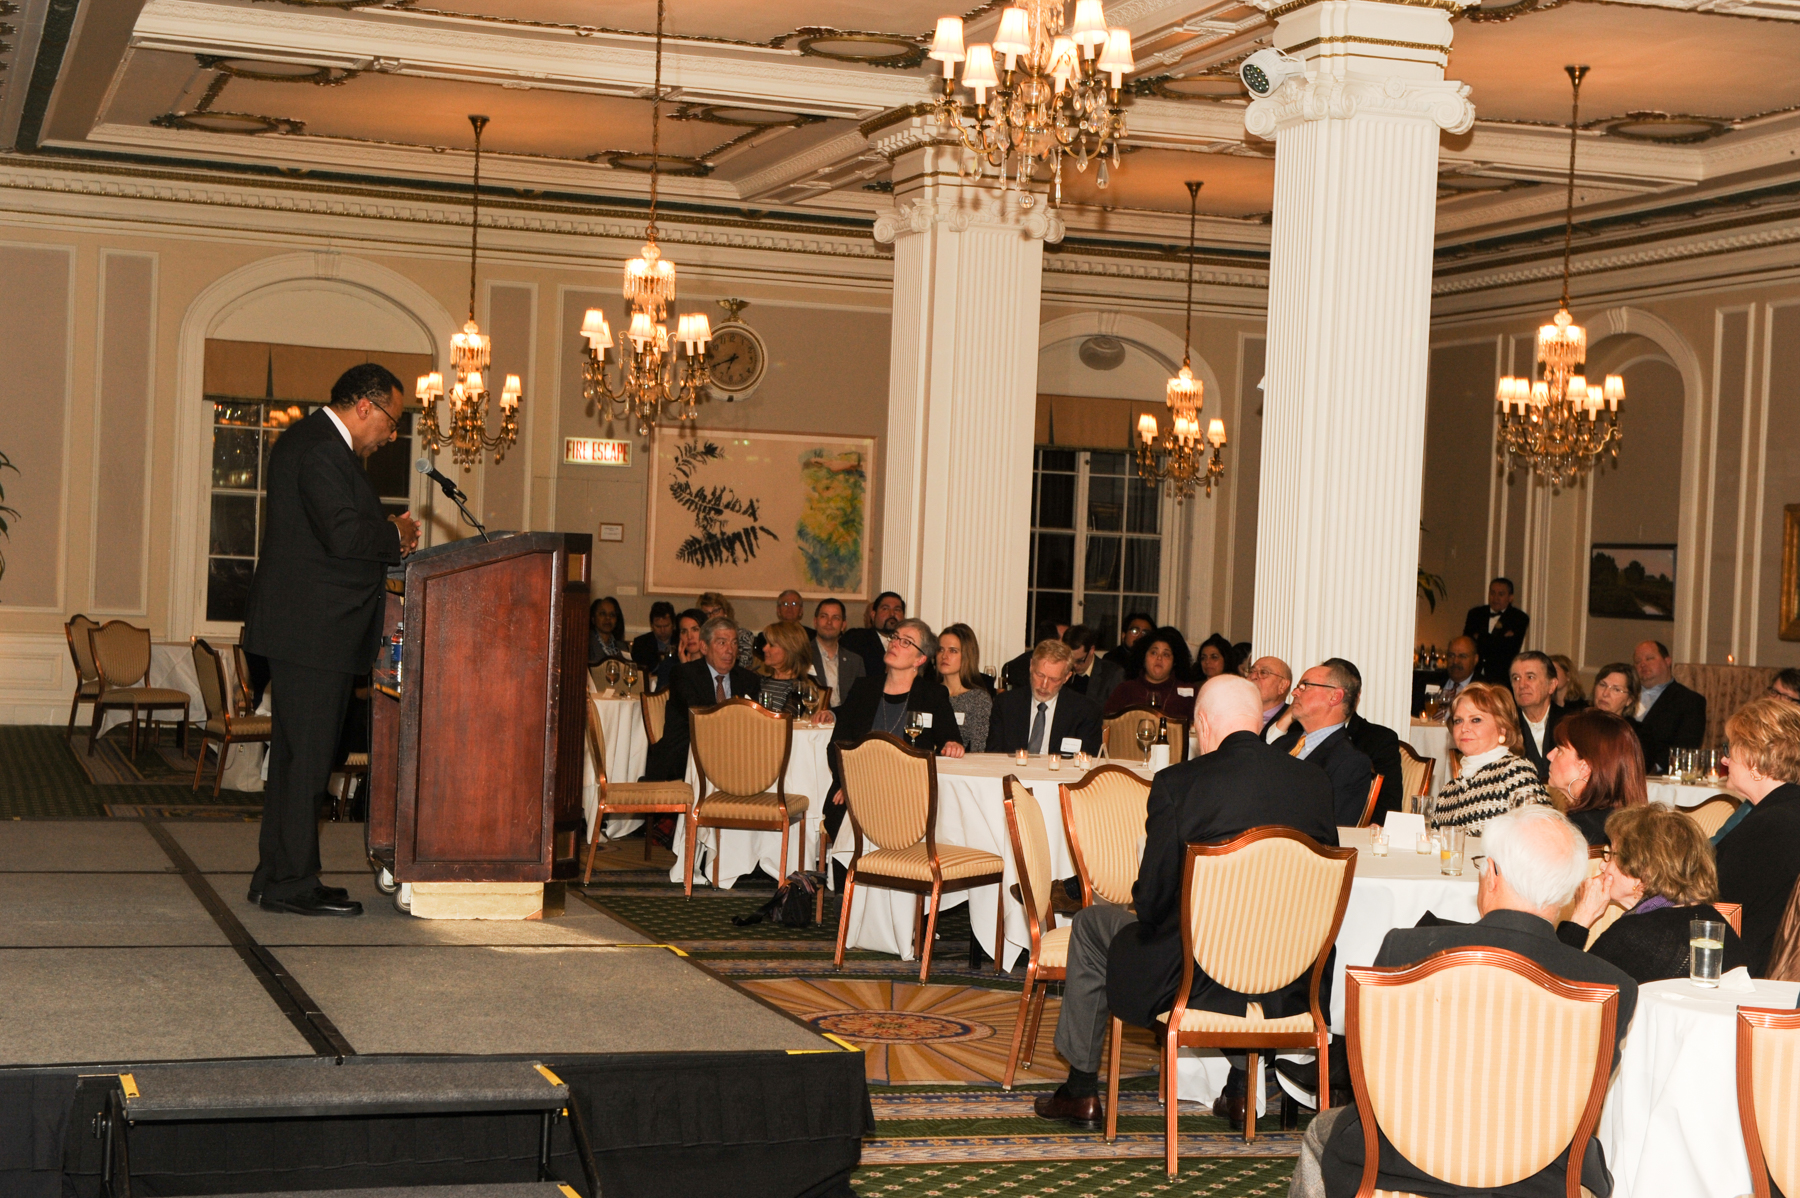 Clarence Page gives addresses attendees at the Union Club of Chicago. (Photo by Paul Berg.)